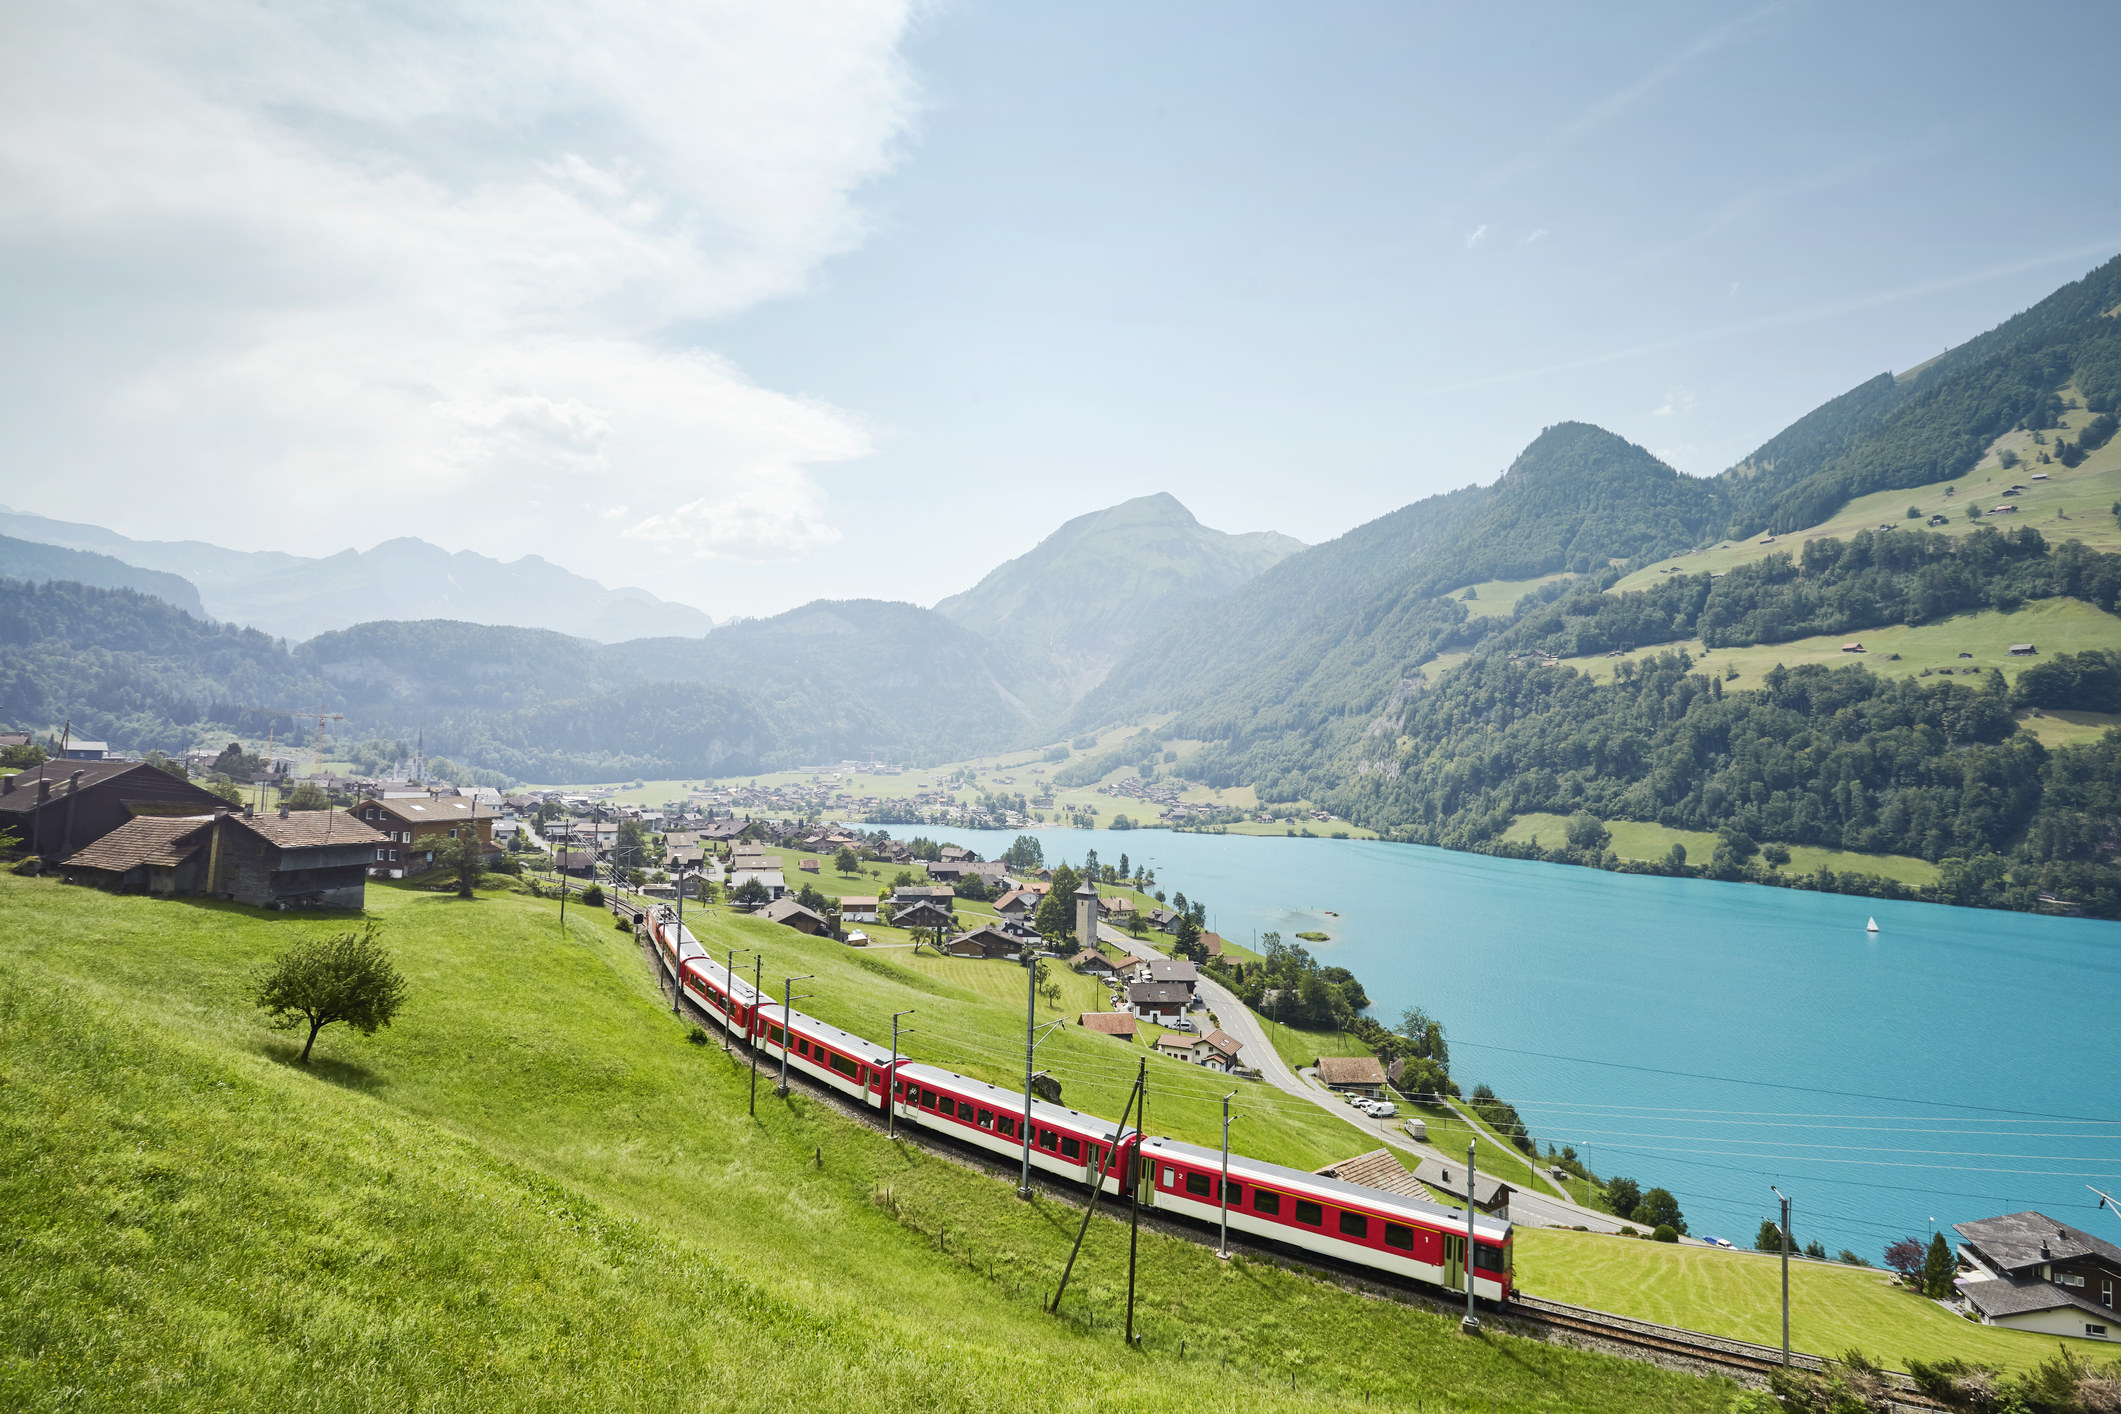 A train running through a countryside in Switzerland